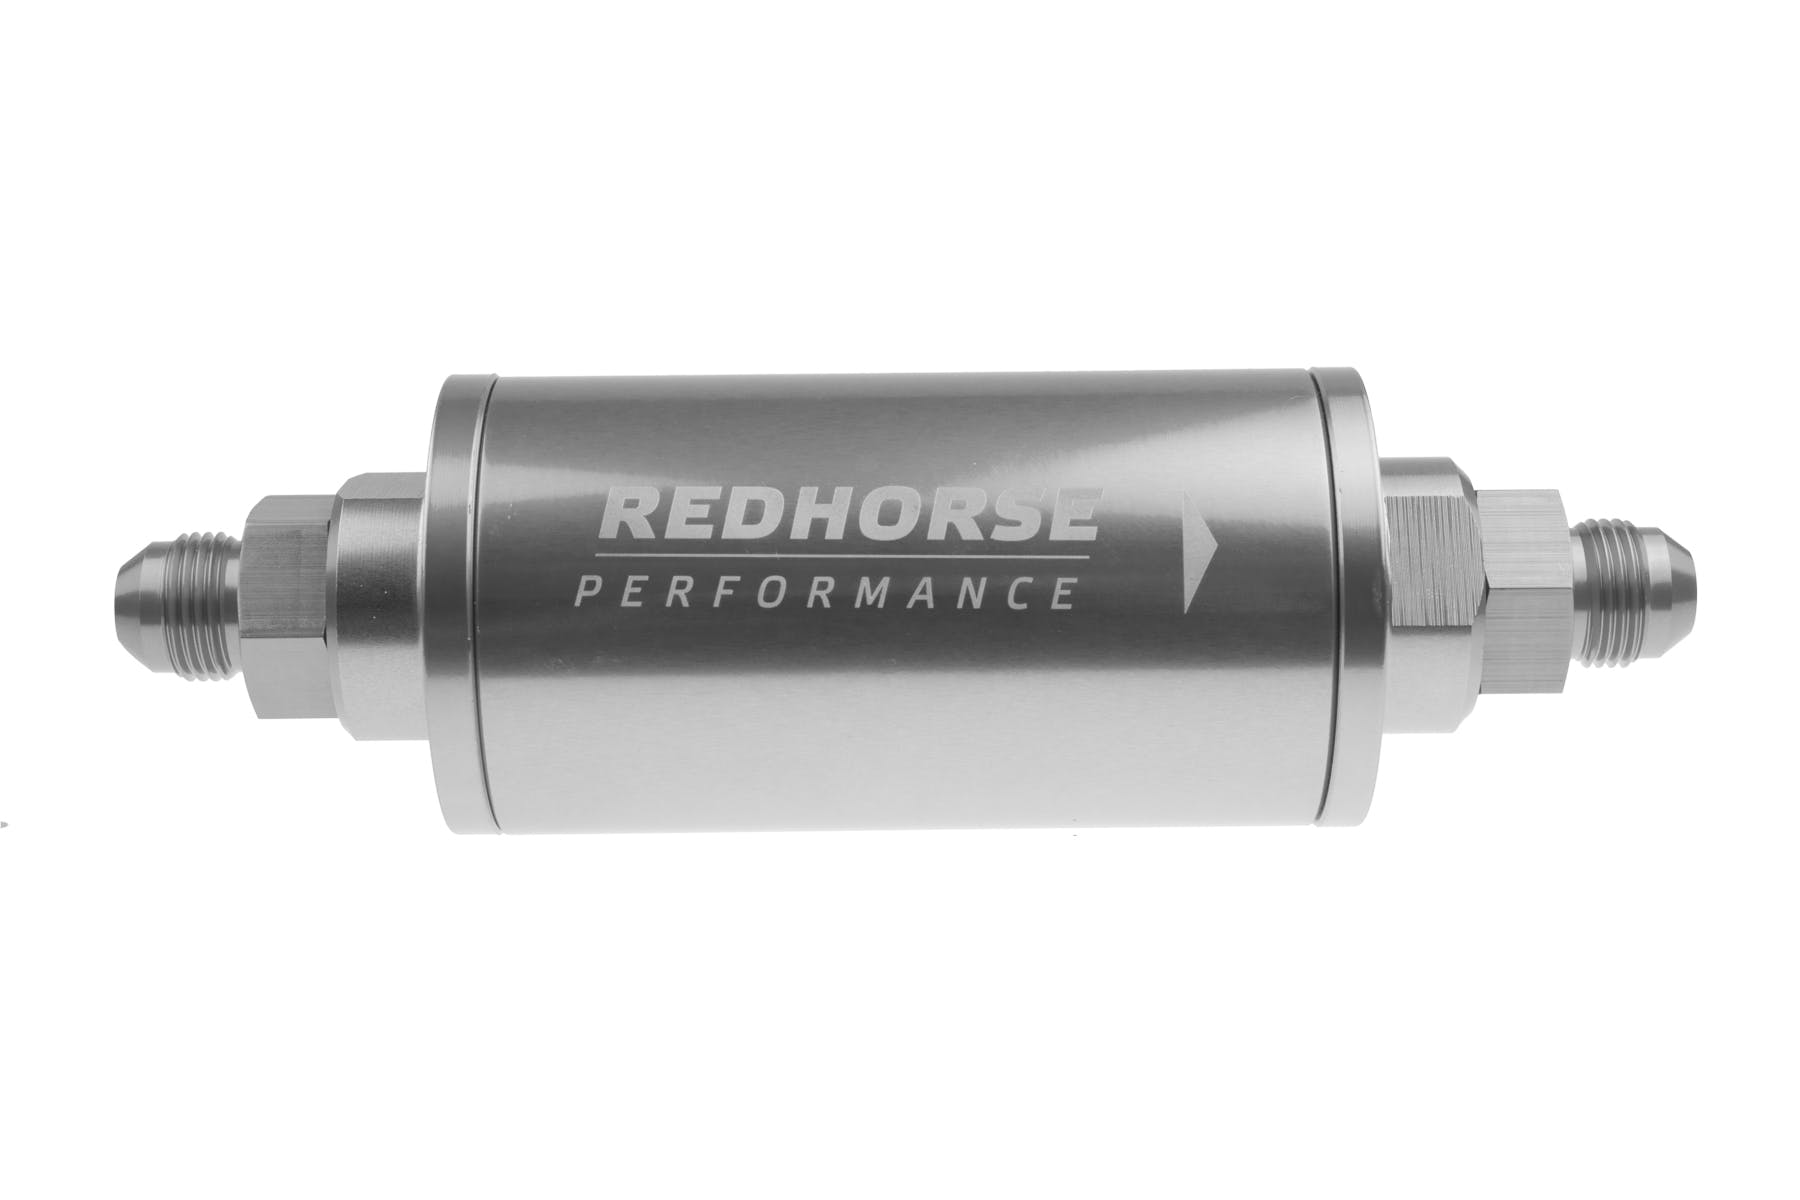 Redhorse Performance 4651-06-5 6in Cylindrical In-Line Race Fuel Filter - 06 AN